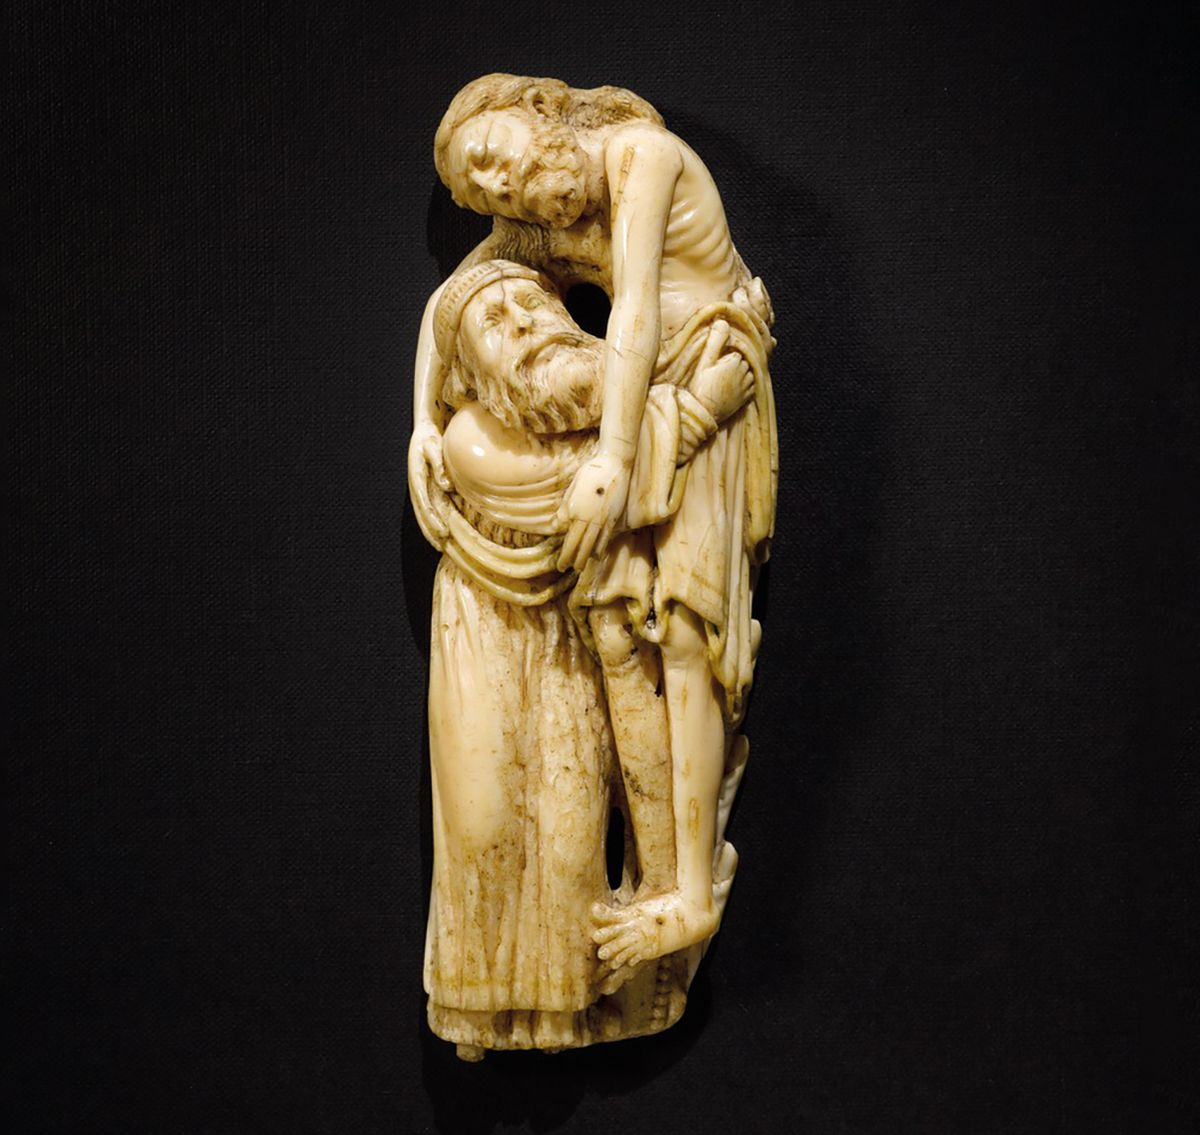 Deposition from the Cross (around 1190-1200) was originally part of a much larger Passion altarpiece ensemble Photo: © Department for Culture, Media and Sport